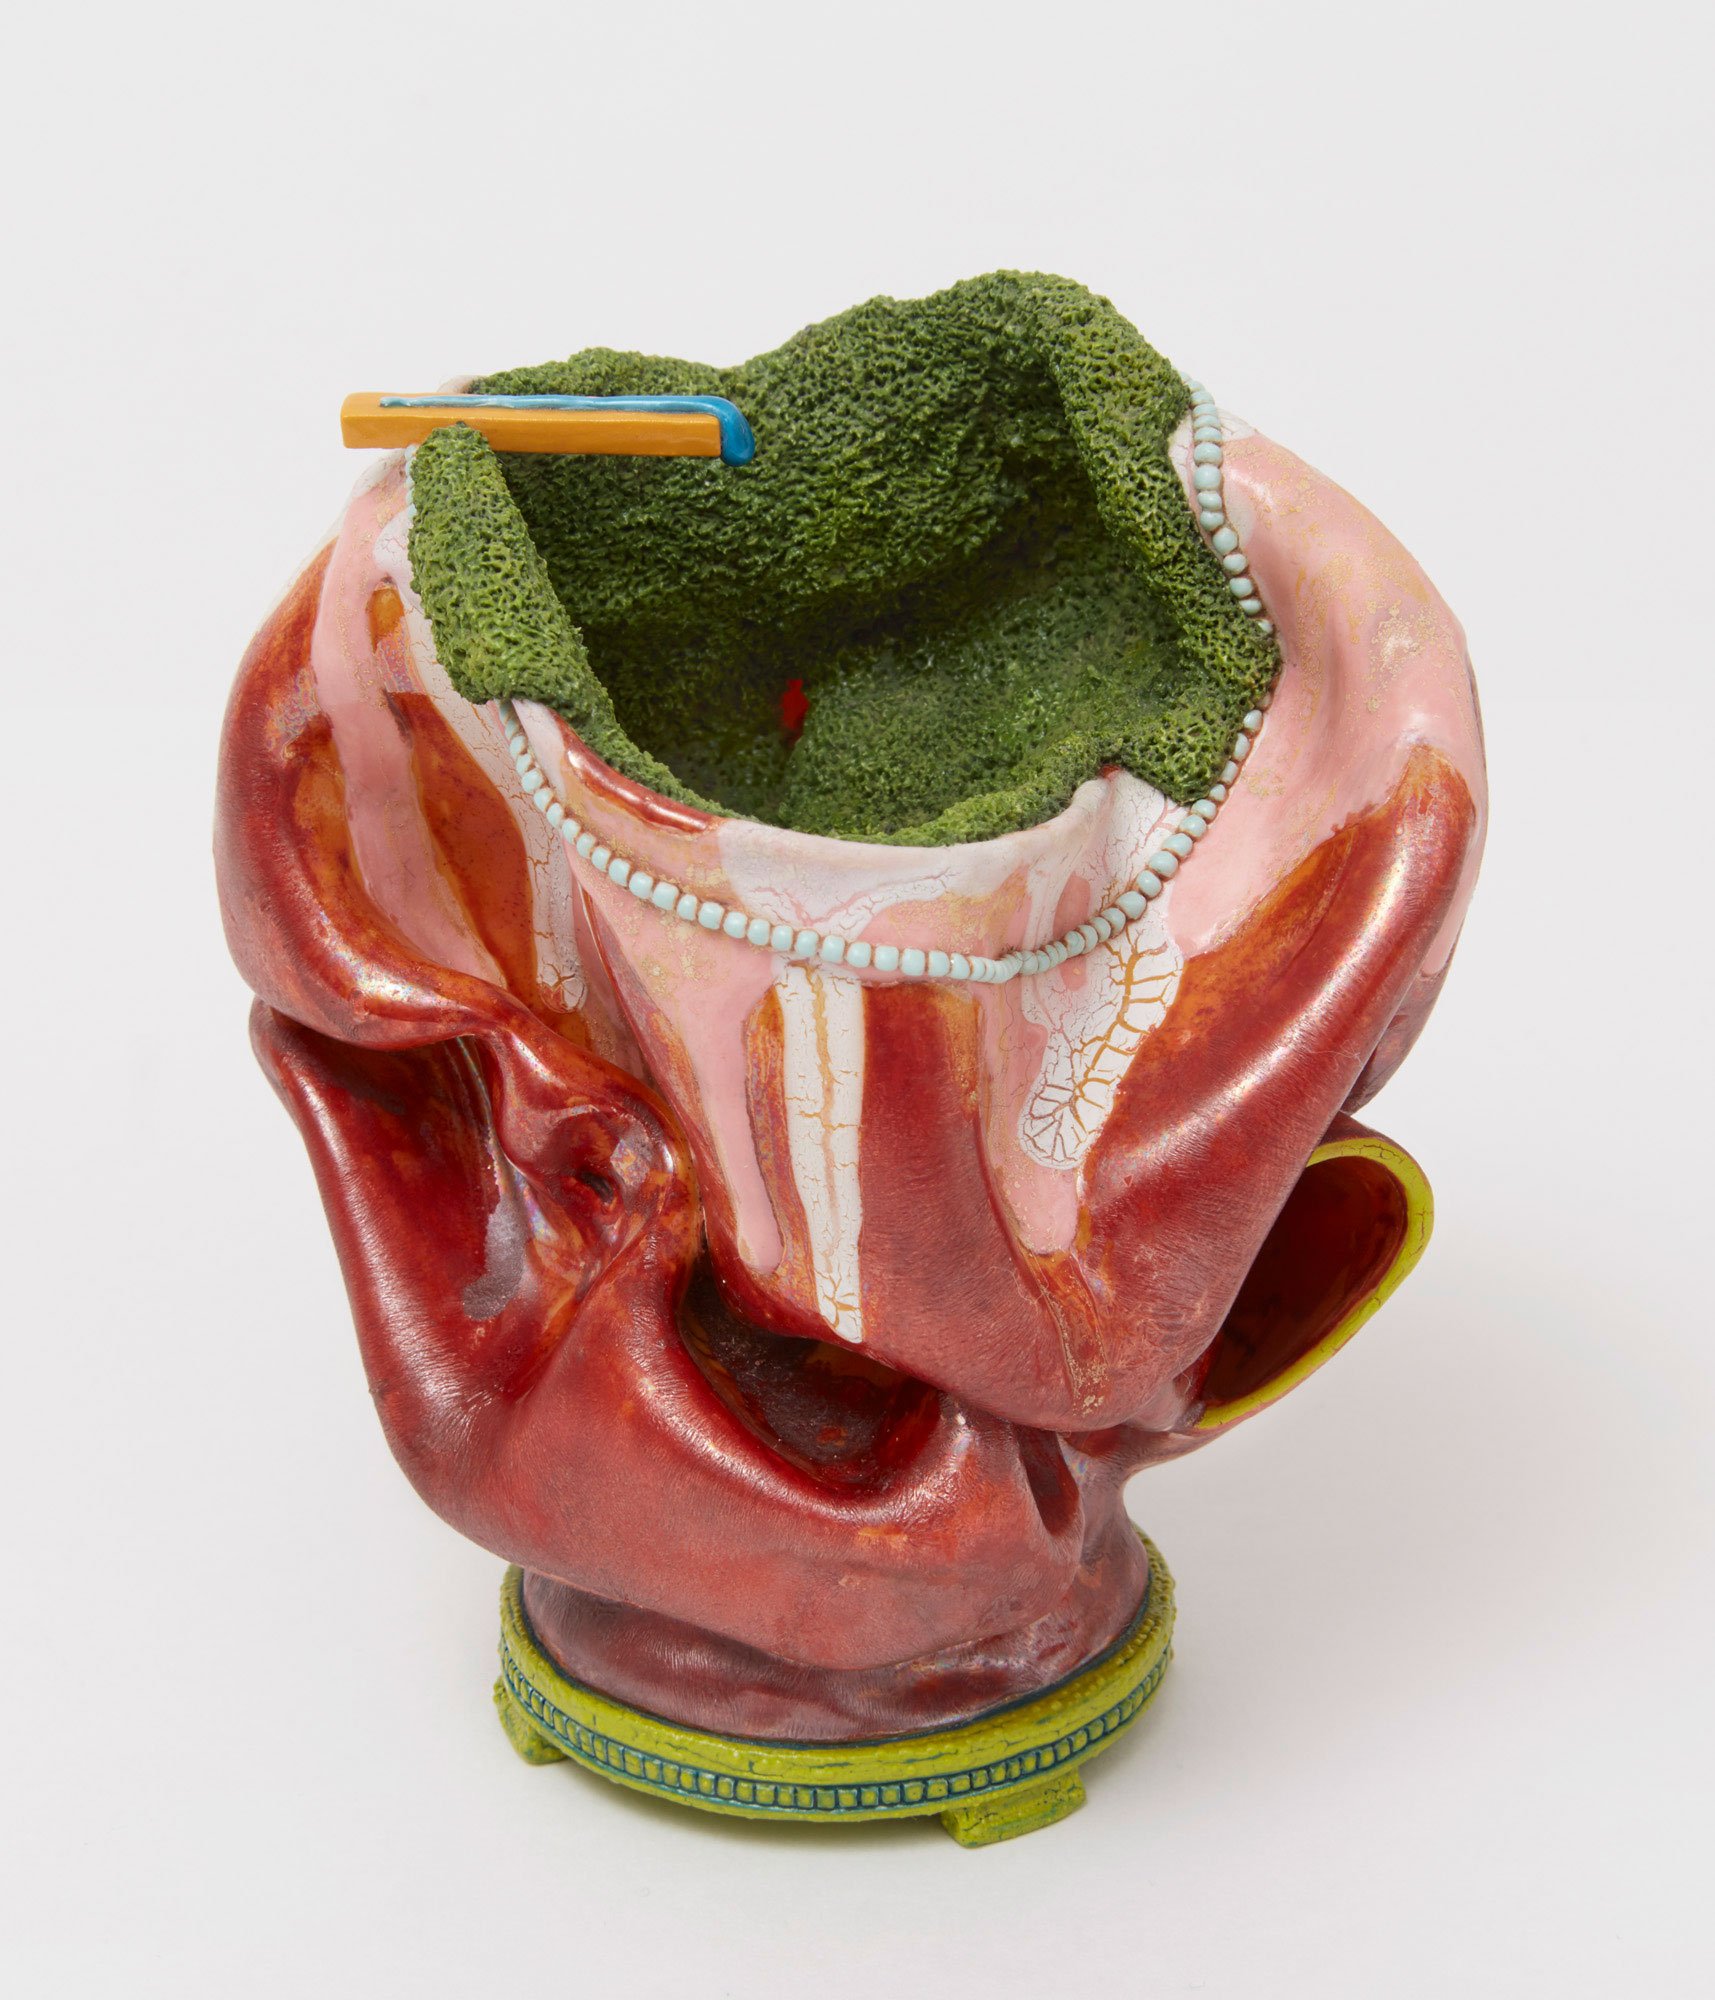  Kathy Butterly (United States, born 1963),  Cenote , 2004, clay, glaze, 4 x 4 1/8 x 4 inches. Collection of Eric Brown, Sag Harbor, NY. © Kathy Butterly. Image courtesy the artist and James Cohan, New York. Photo: Alan Wiener.  